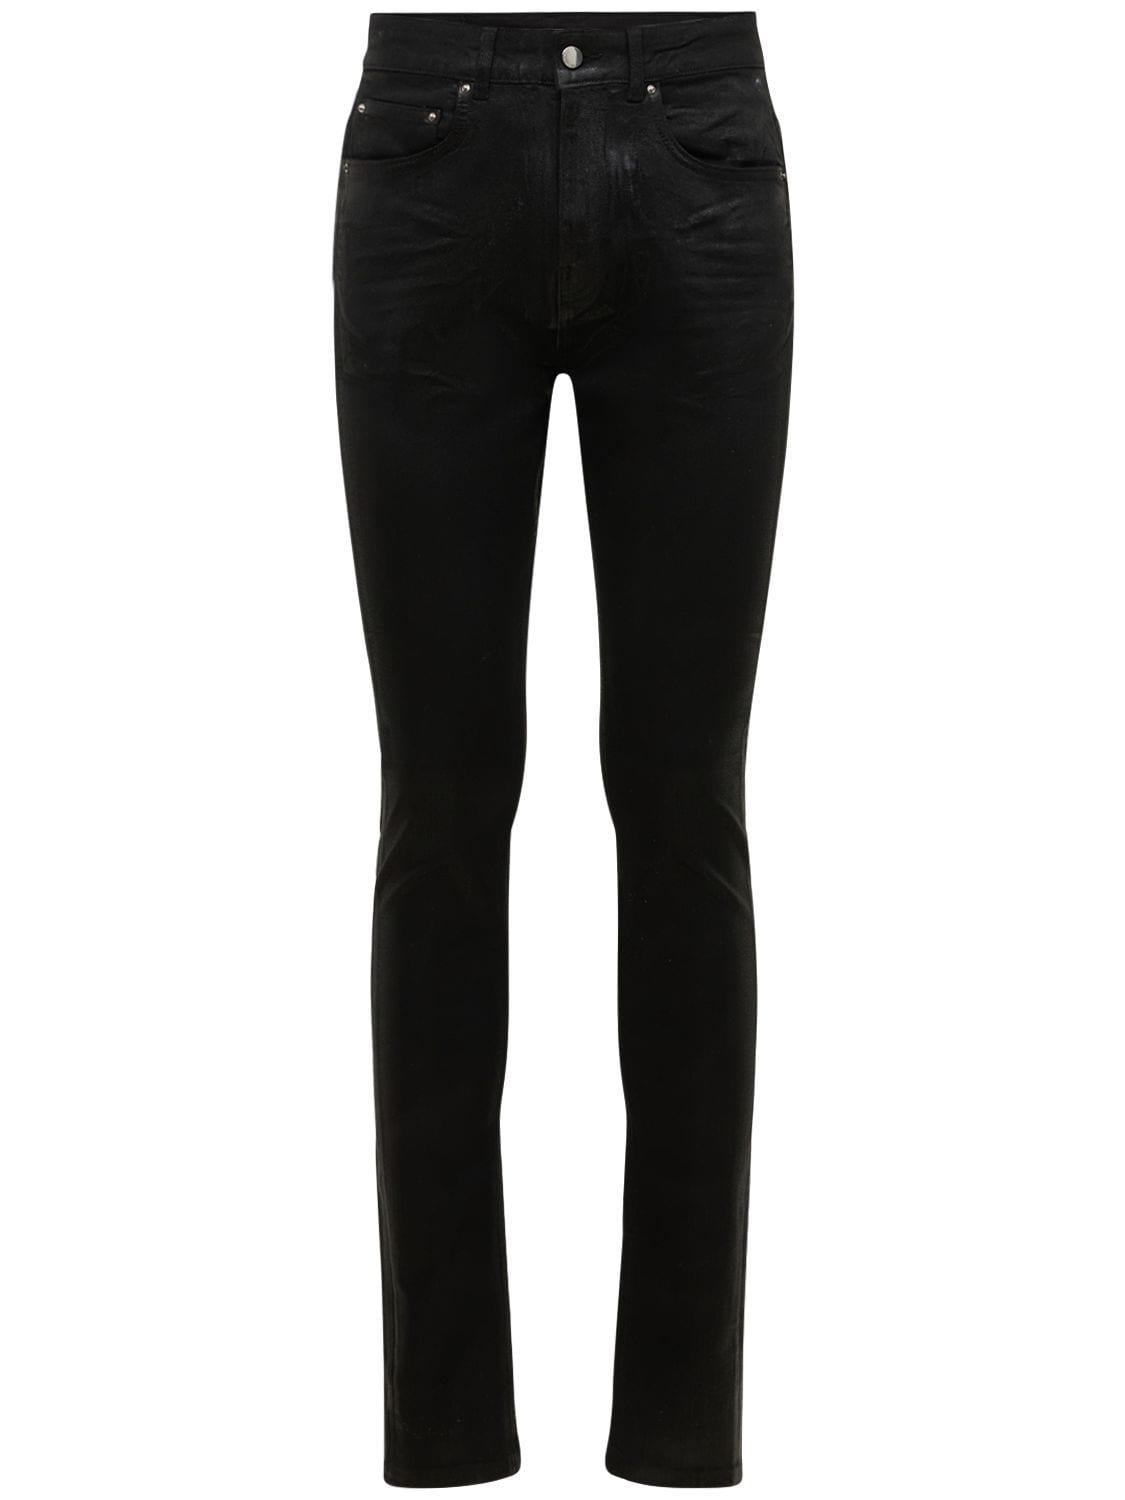 FLANEUR HOMME Waxed Skinny Jeans in Black for Men | Lyst